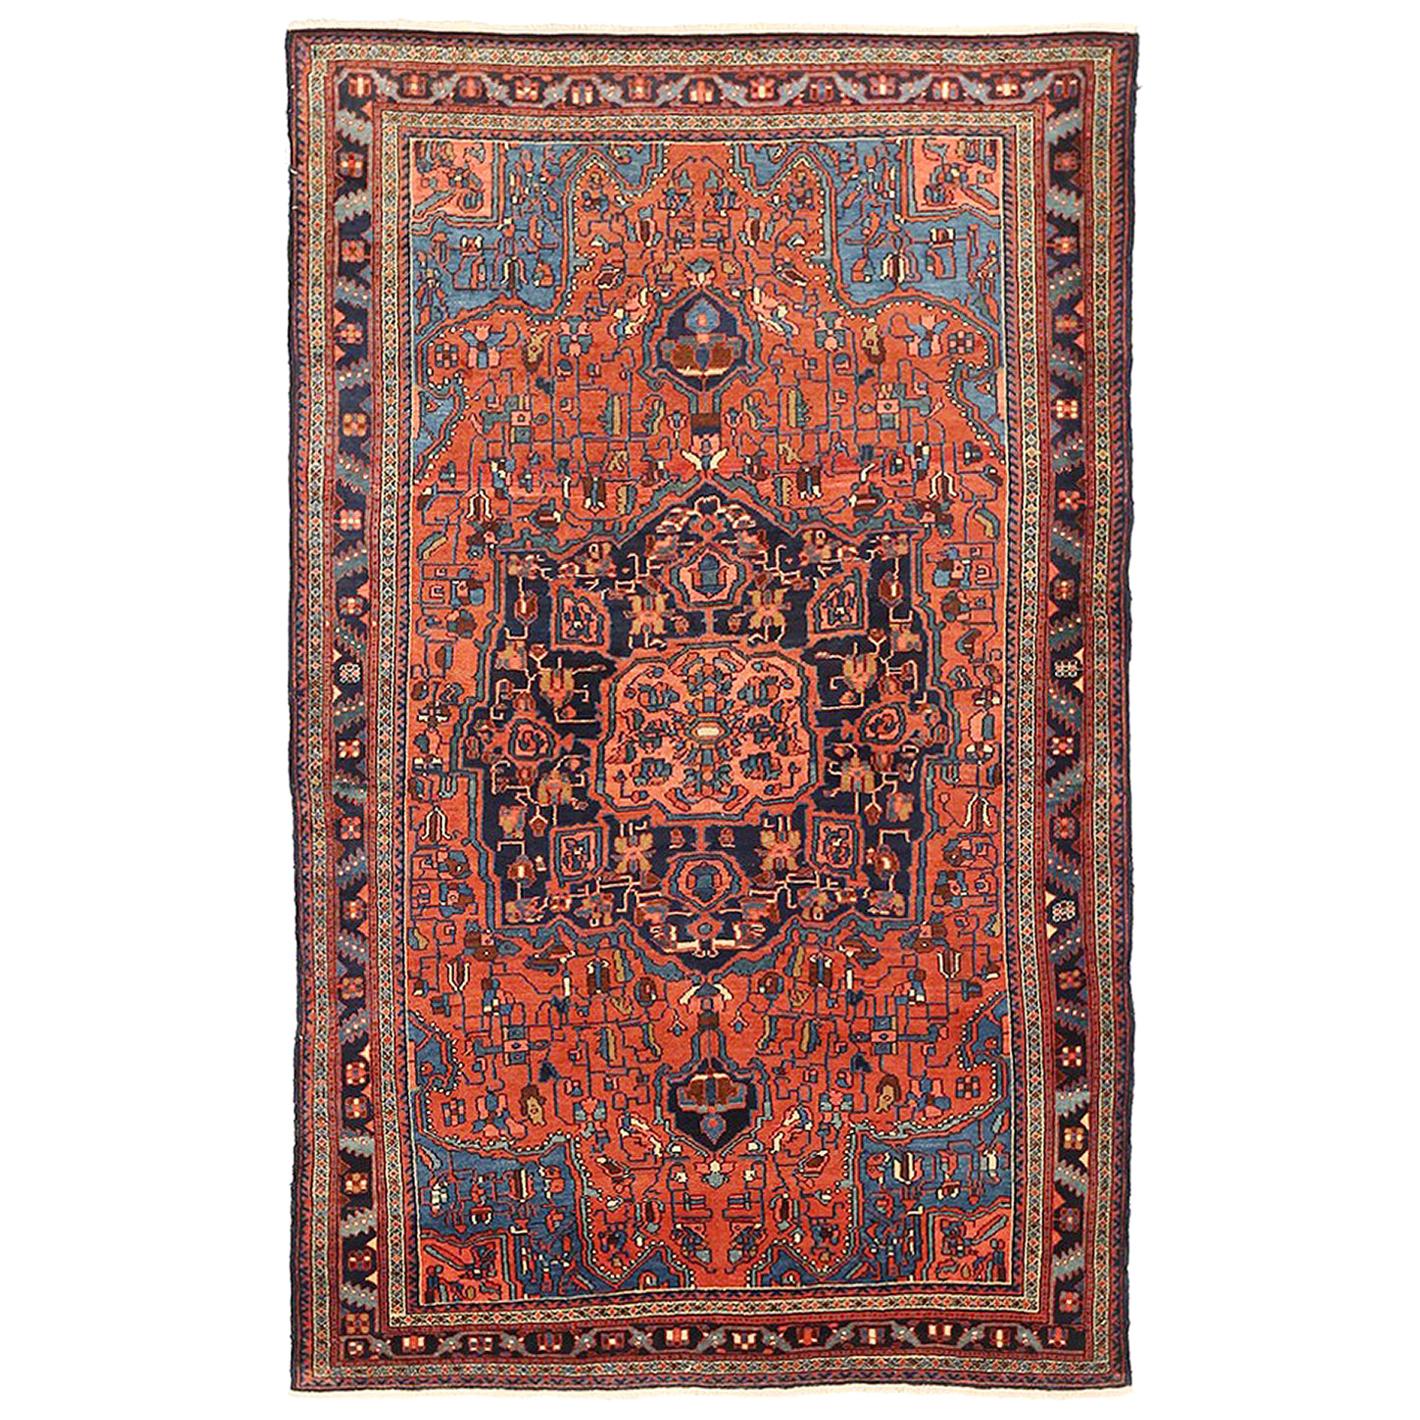 Antique Persian Hamadan Rug with Blue and Red Flower Details on Black Field